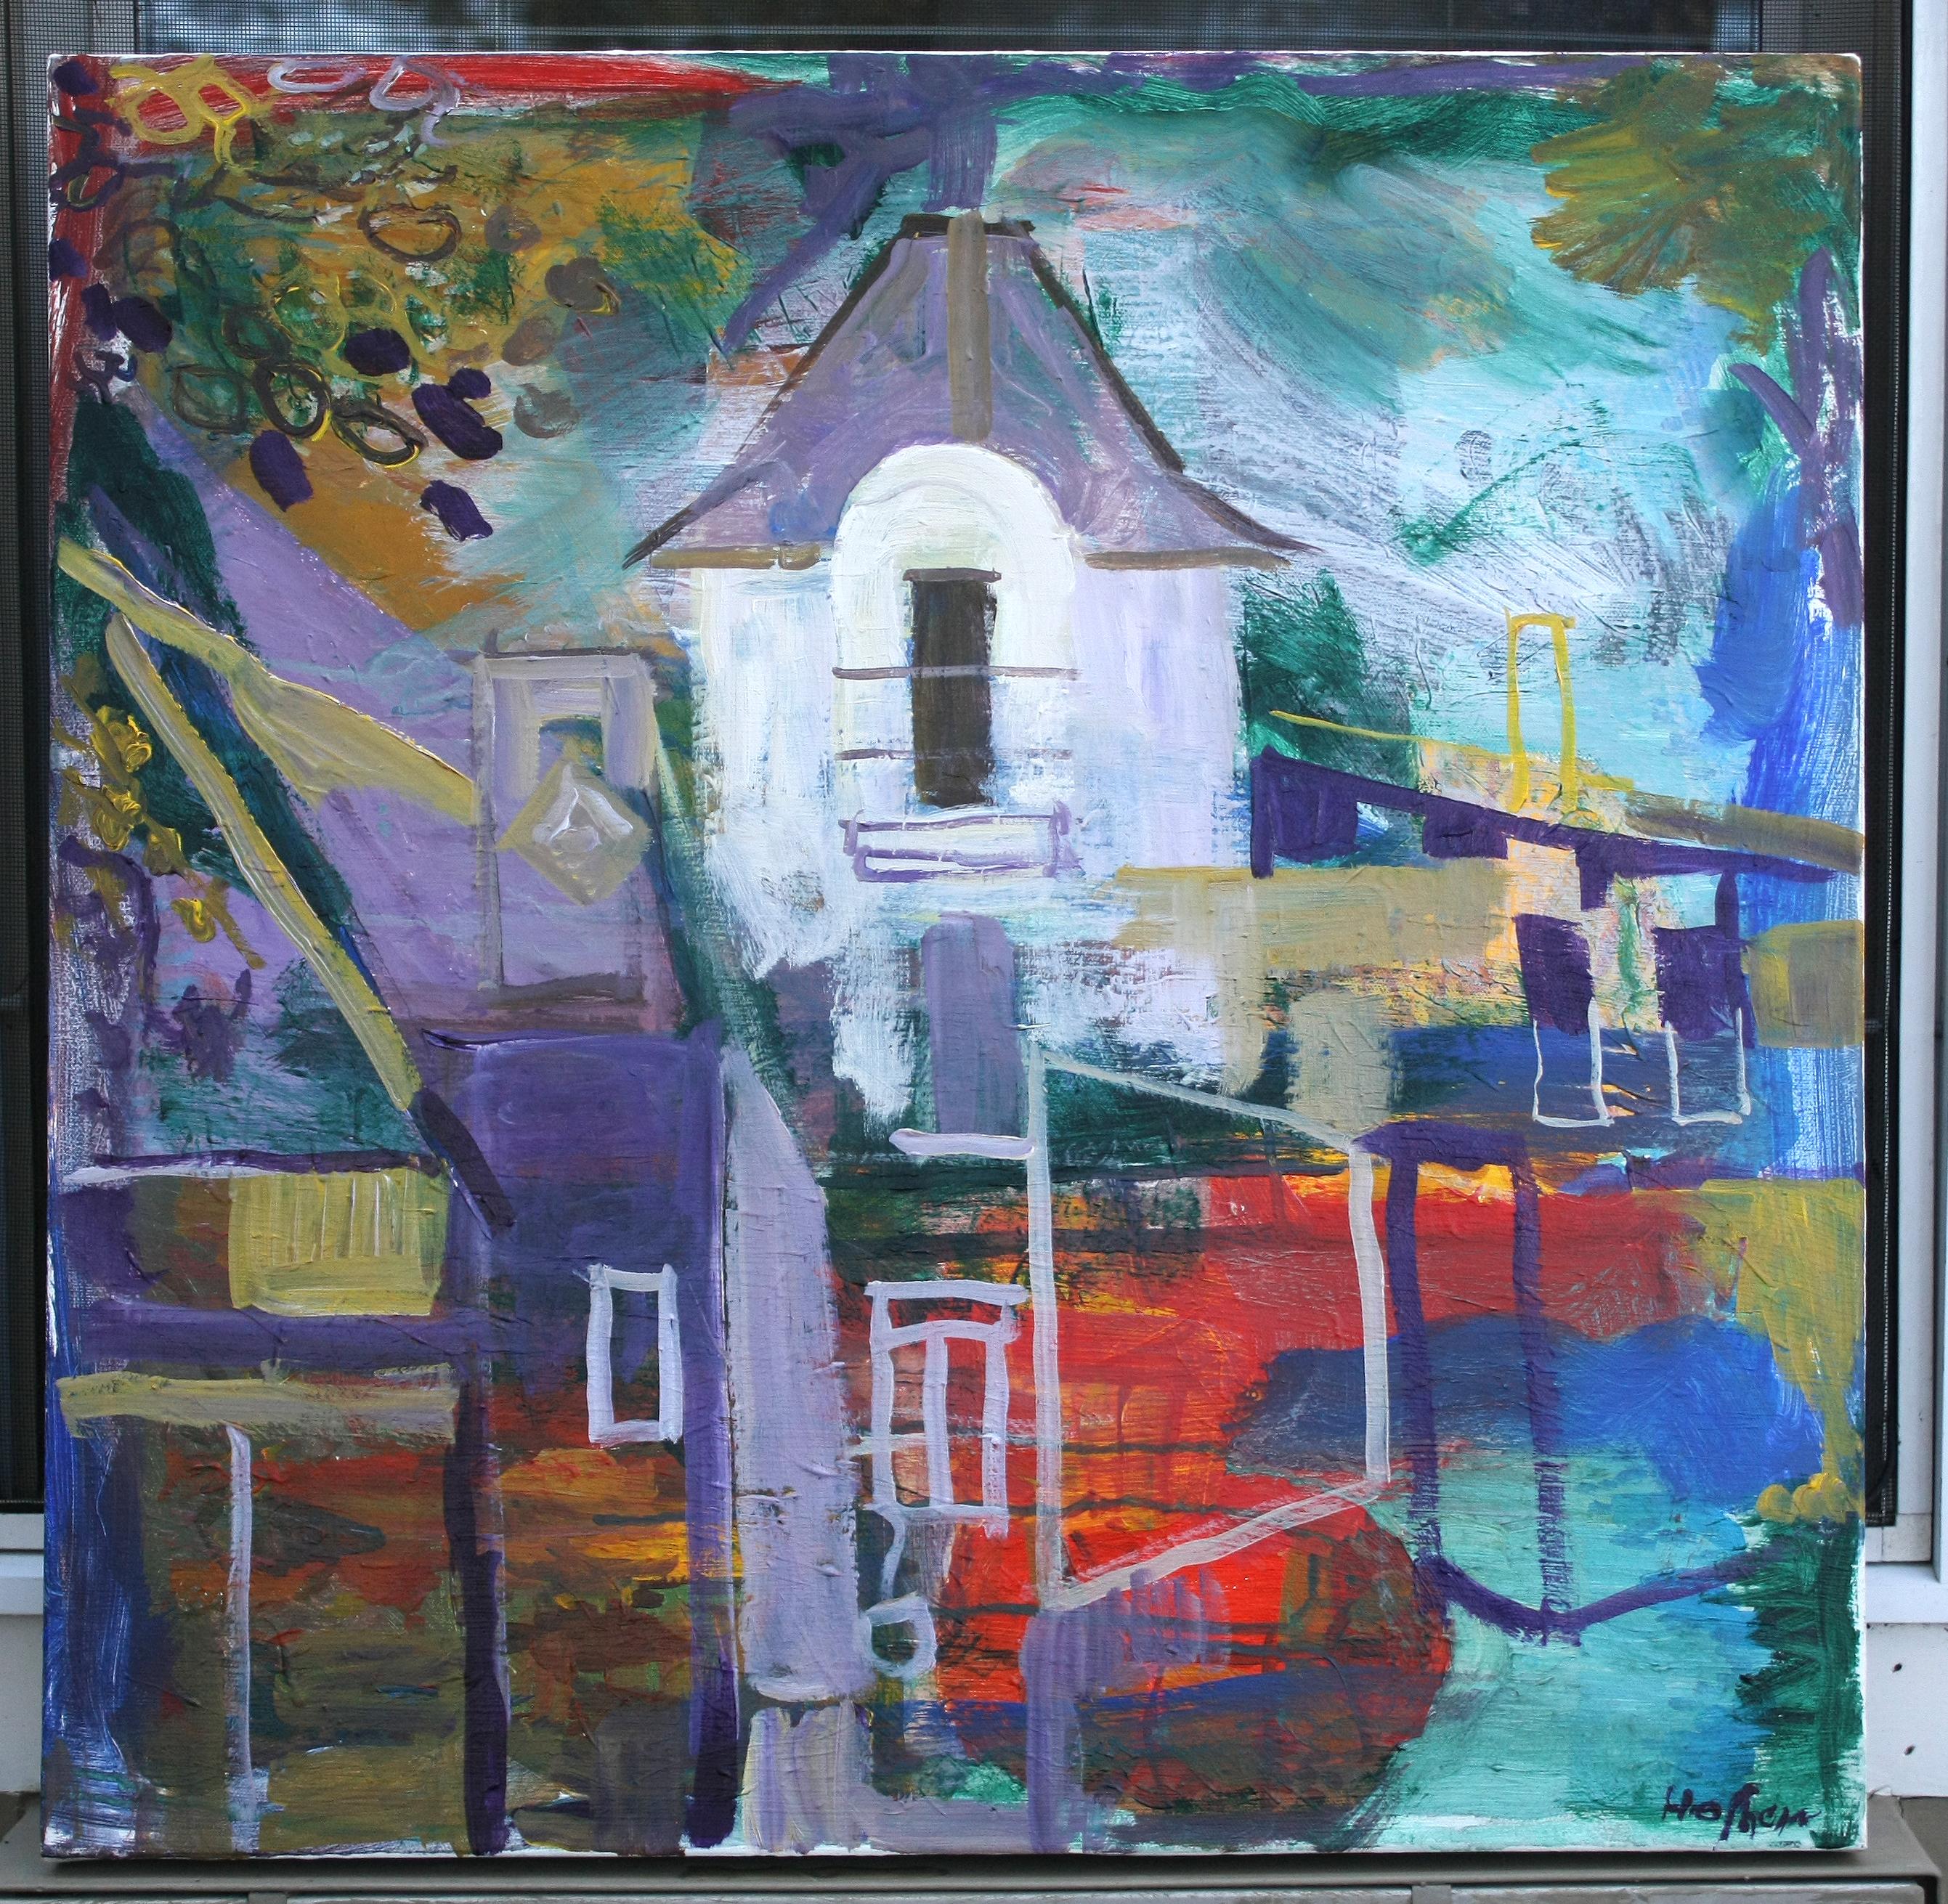 <p>Artist Comments<br>An ordinary image of an urban house transforms into a stylized representation using expressive colors and paint handling. Linear elements replace many structural features, merging with the wildly textured underpainting and